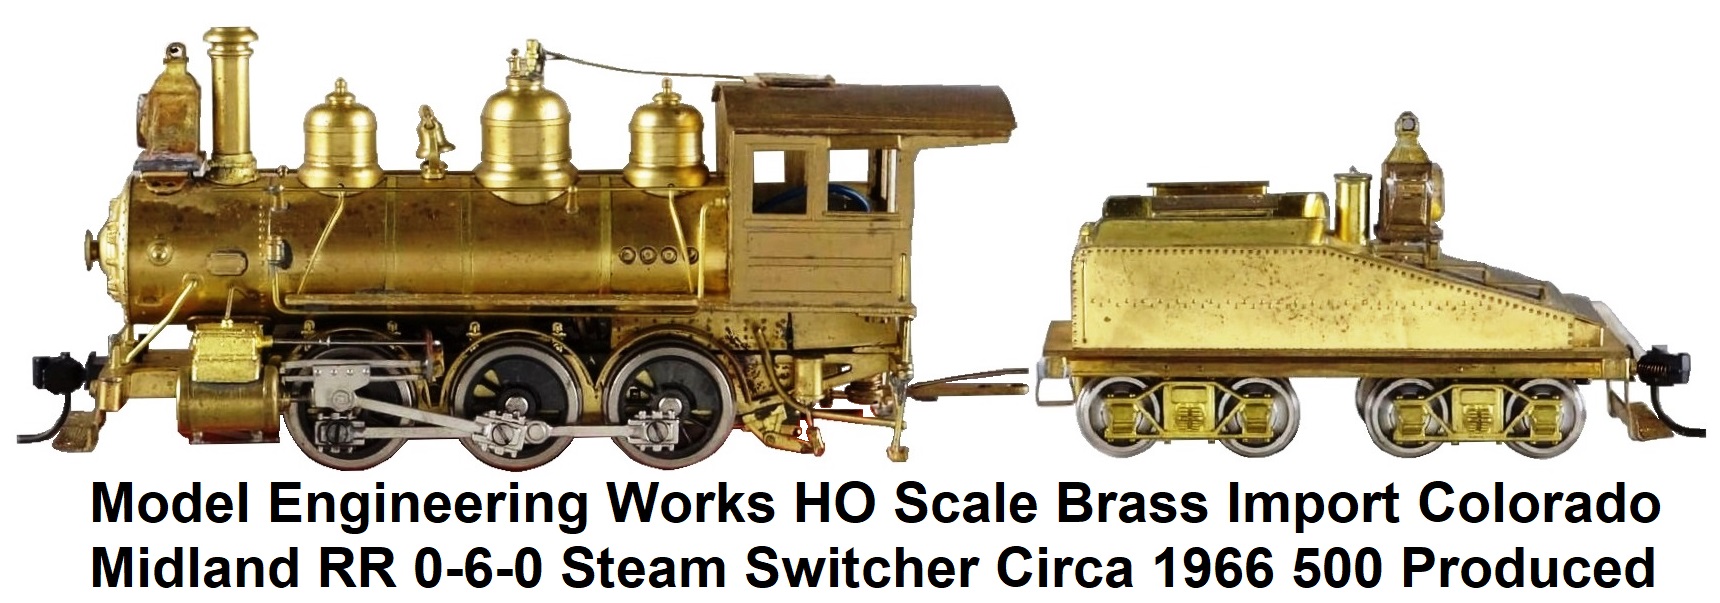 Model Engineering Works brass 0-6-0 Colorado Midland RR Steam Switcher Locomotive and tender circa 1966 500 produced